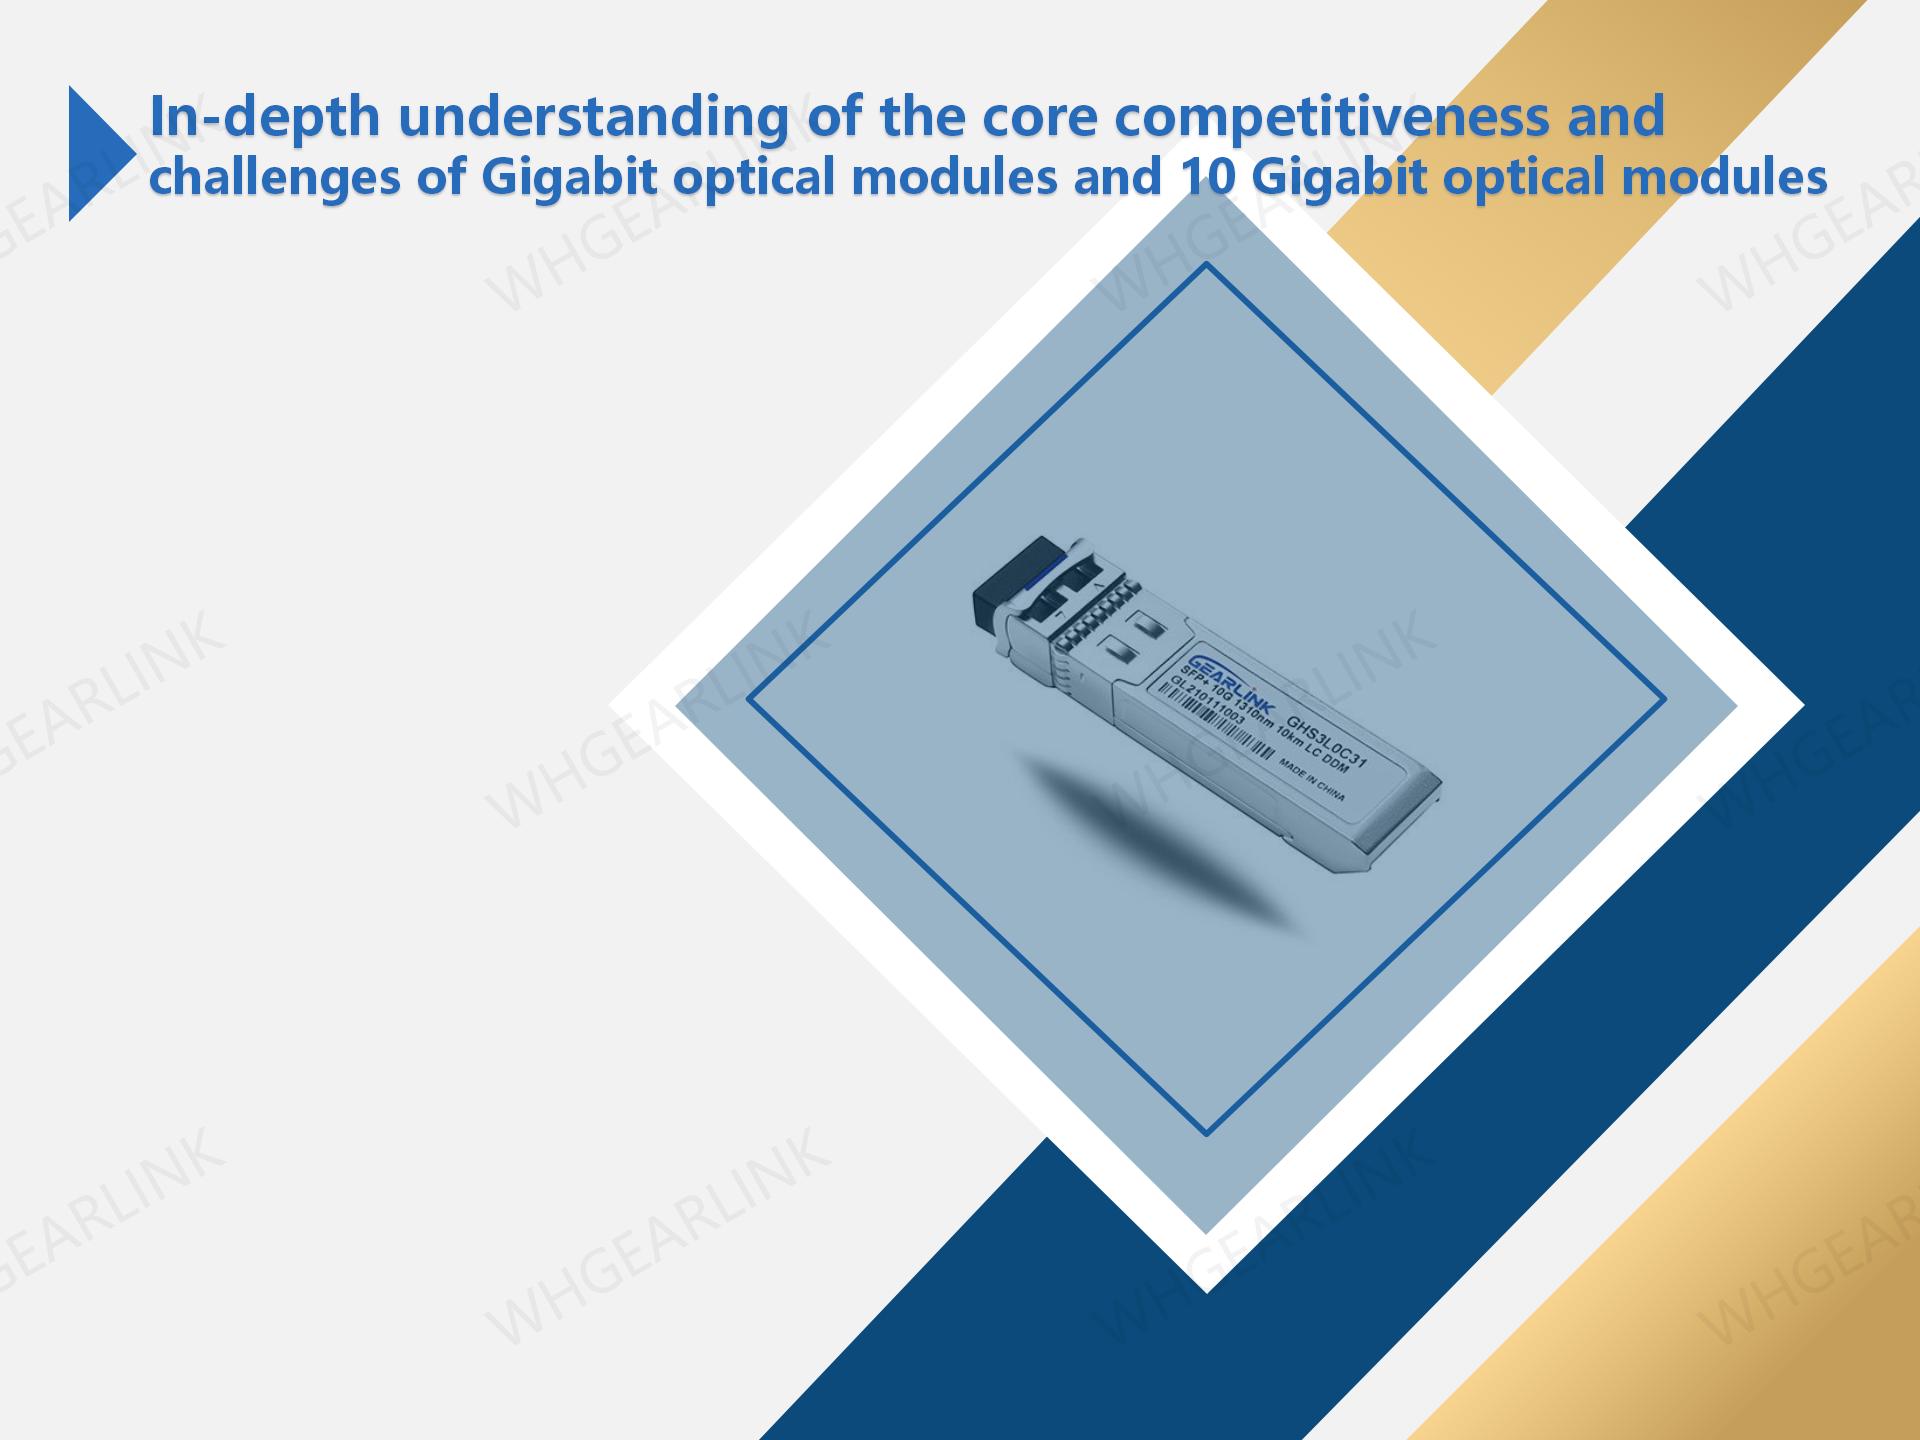 In-depth understanding of the core competitiveness and challenges of Gigabit optical modules and 10 Gigabit optical modules